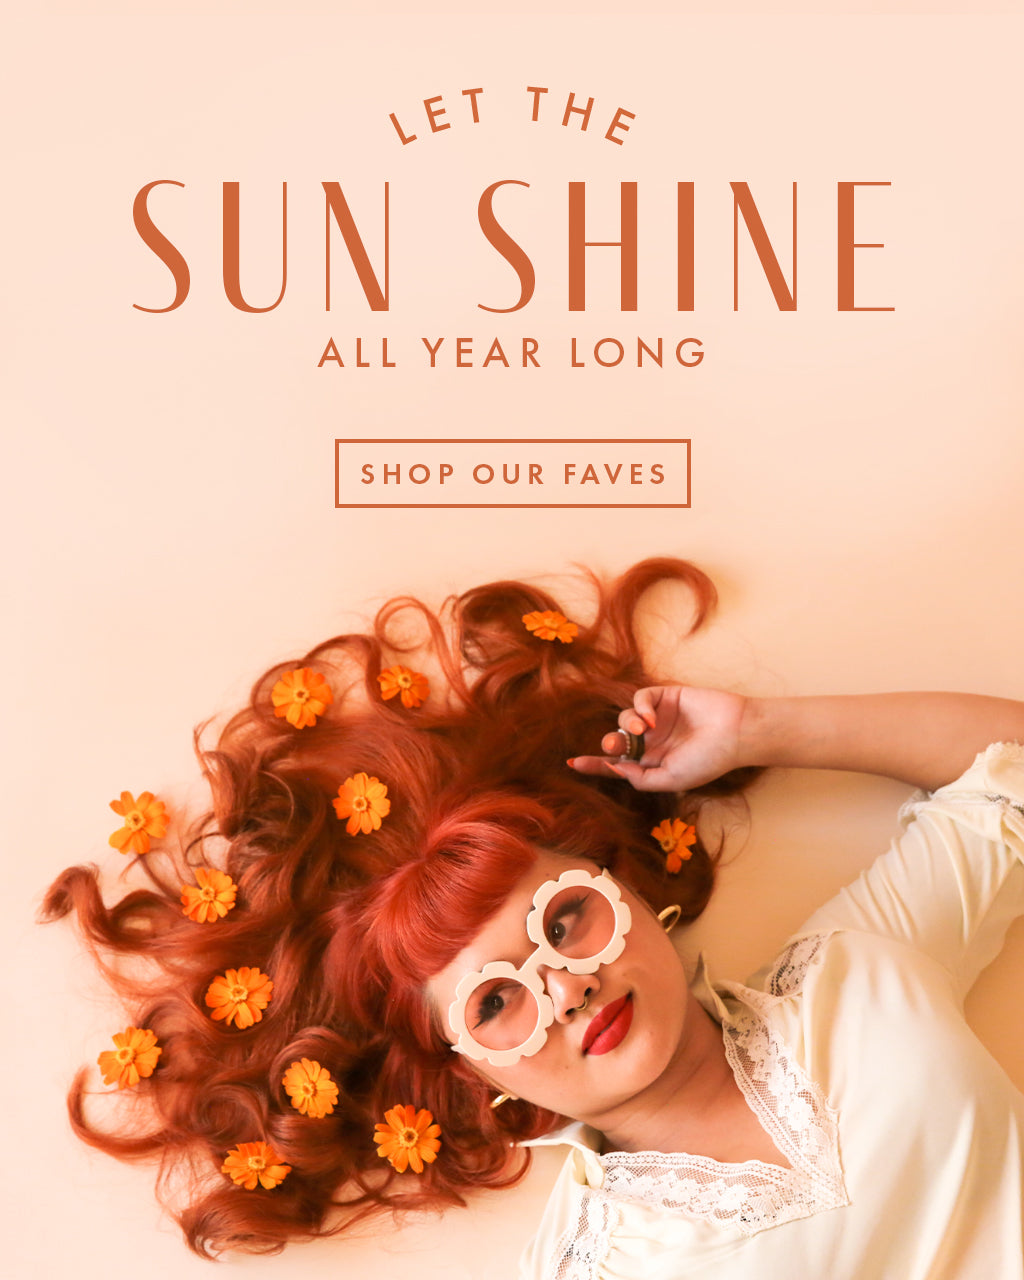 let the sun shine all year long. shop our faves